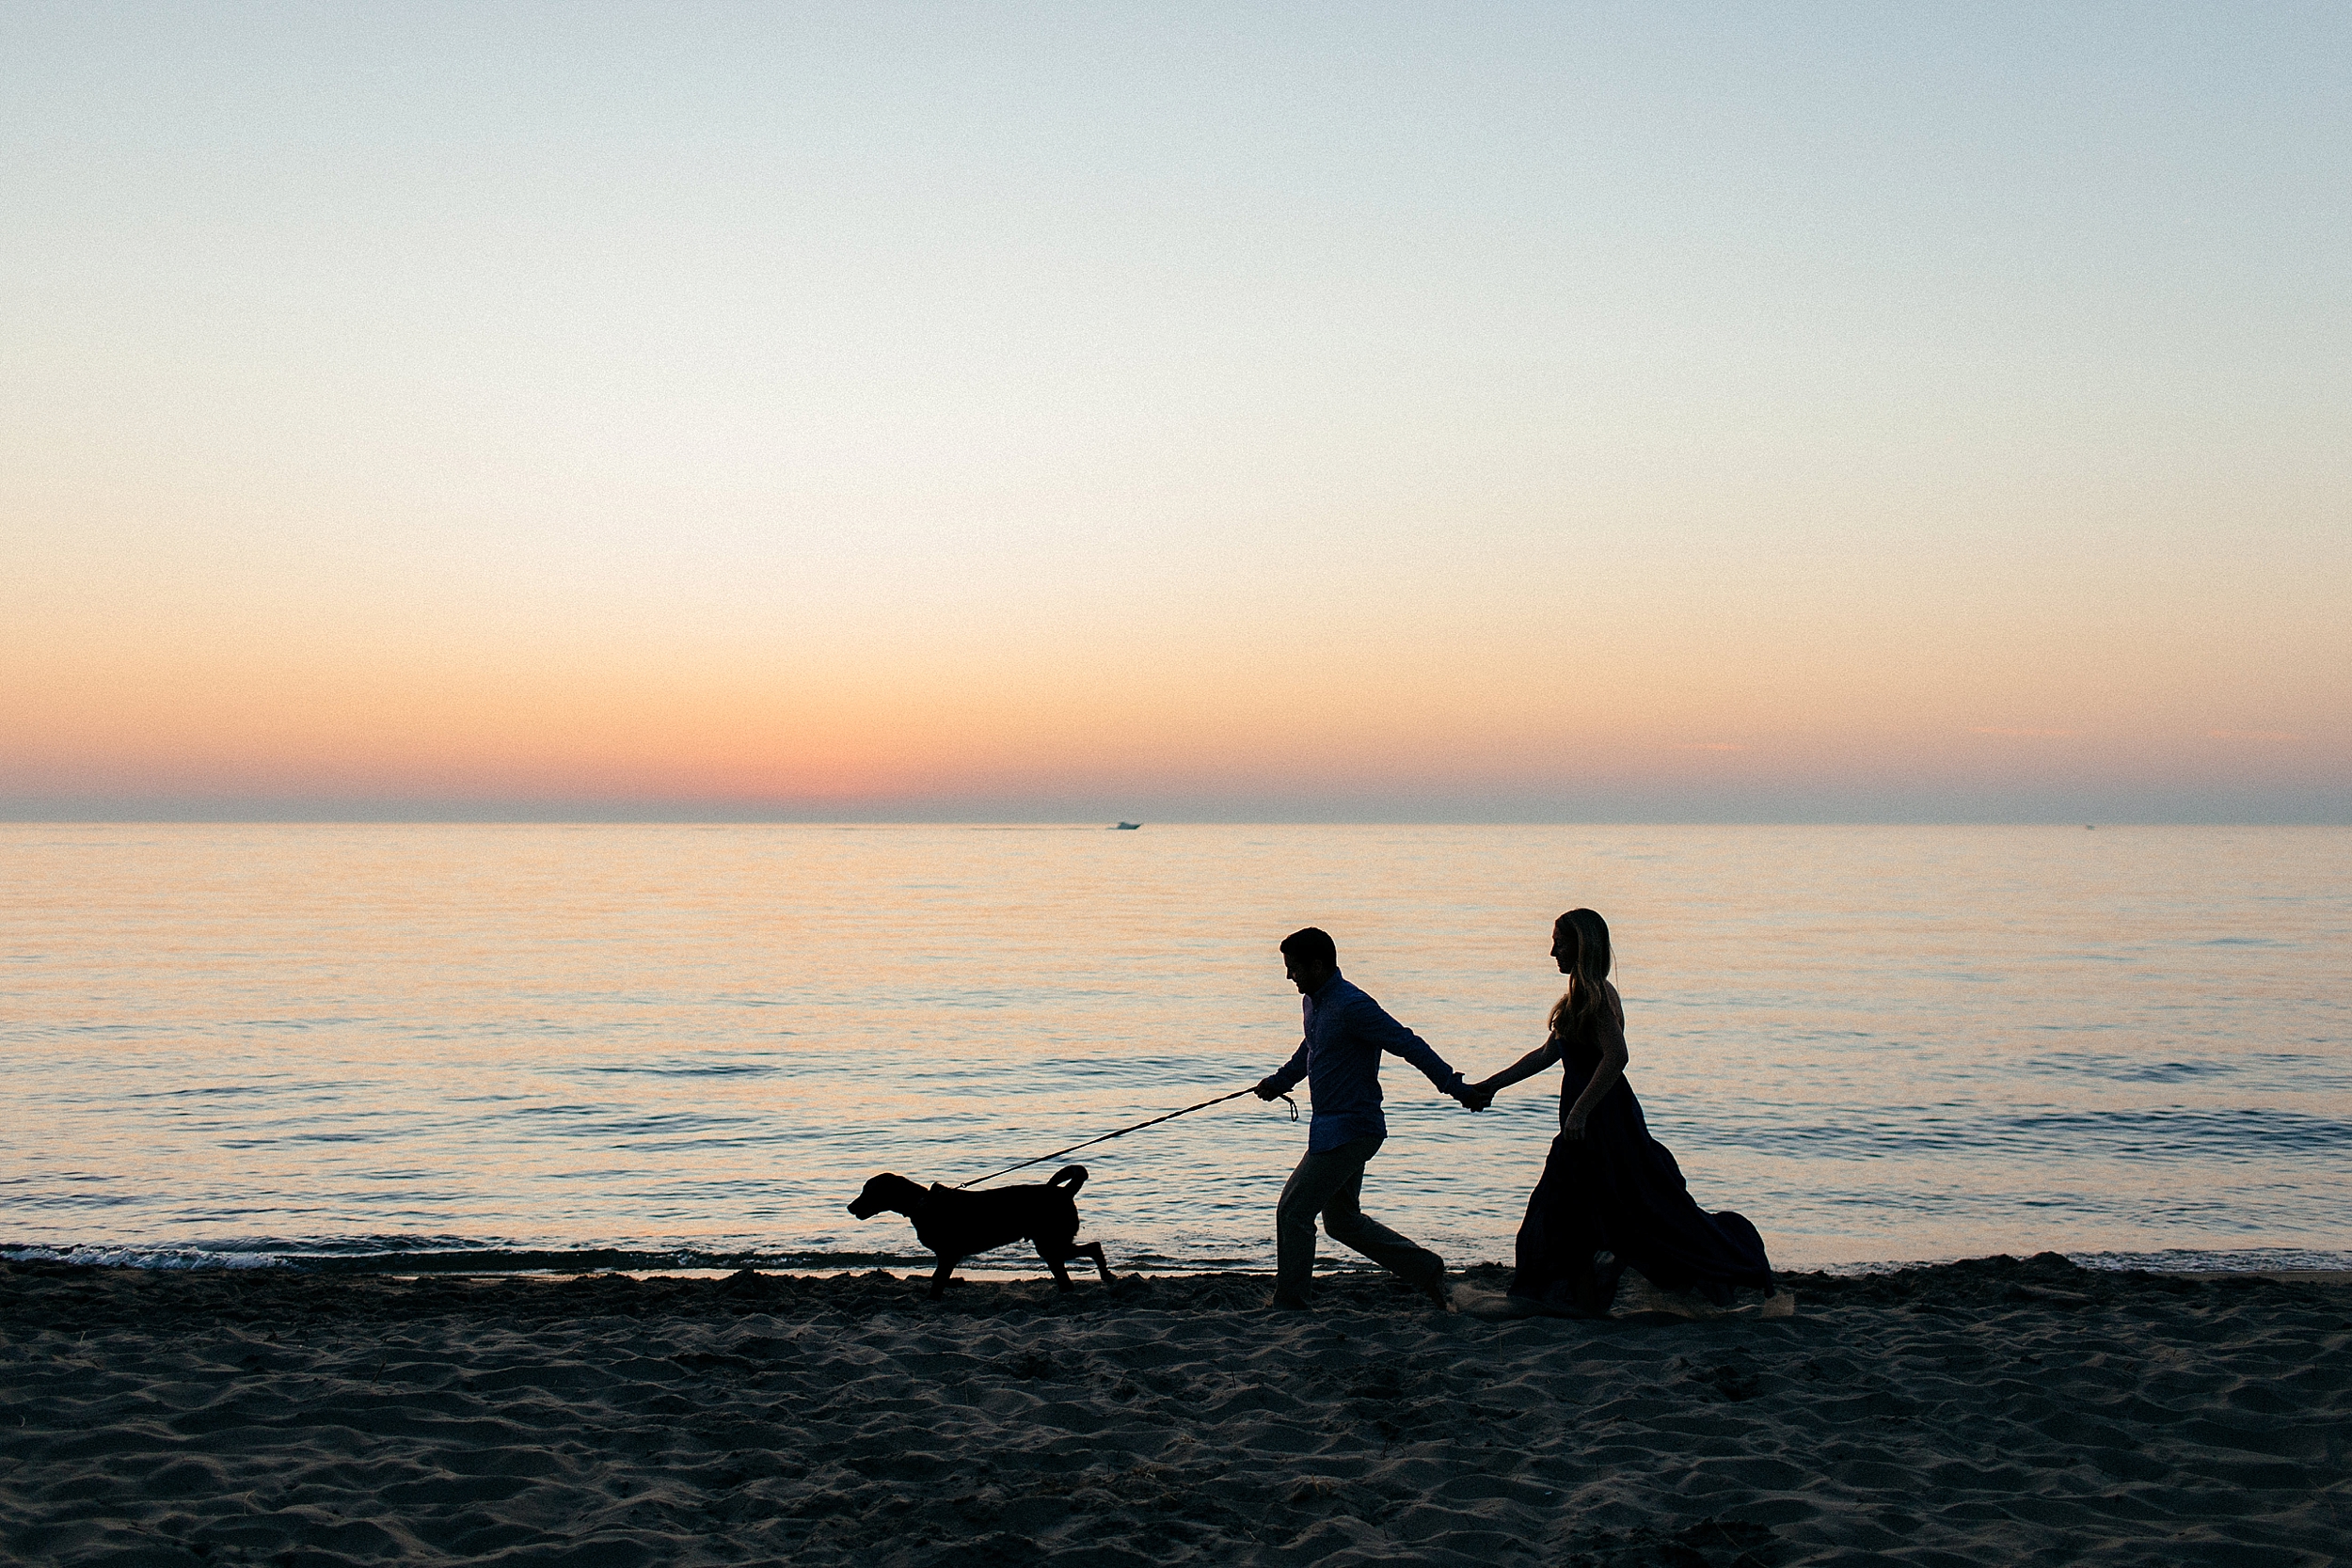  Beach Engagement Session 